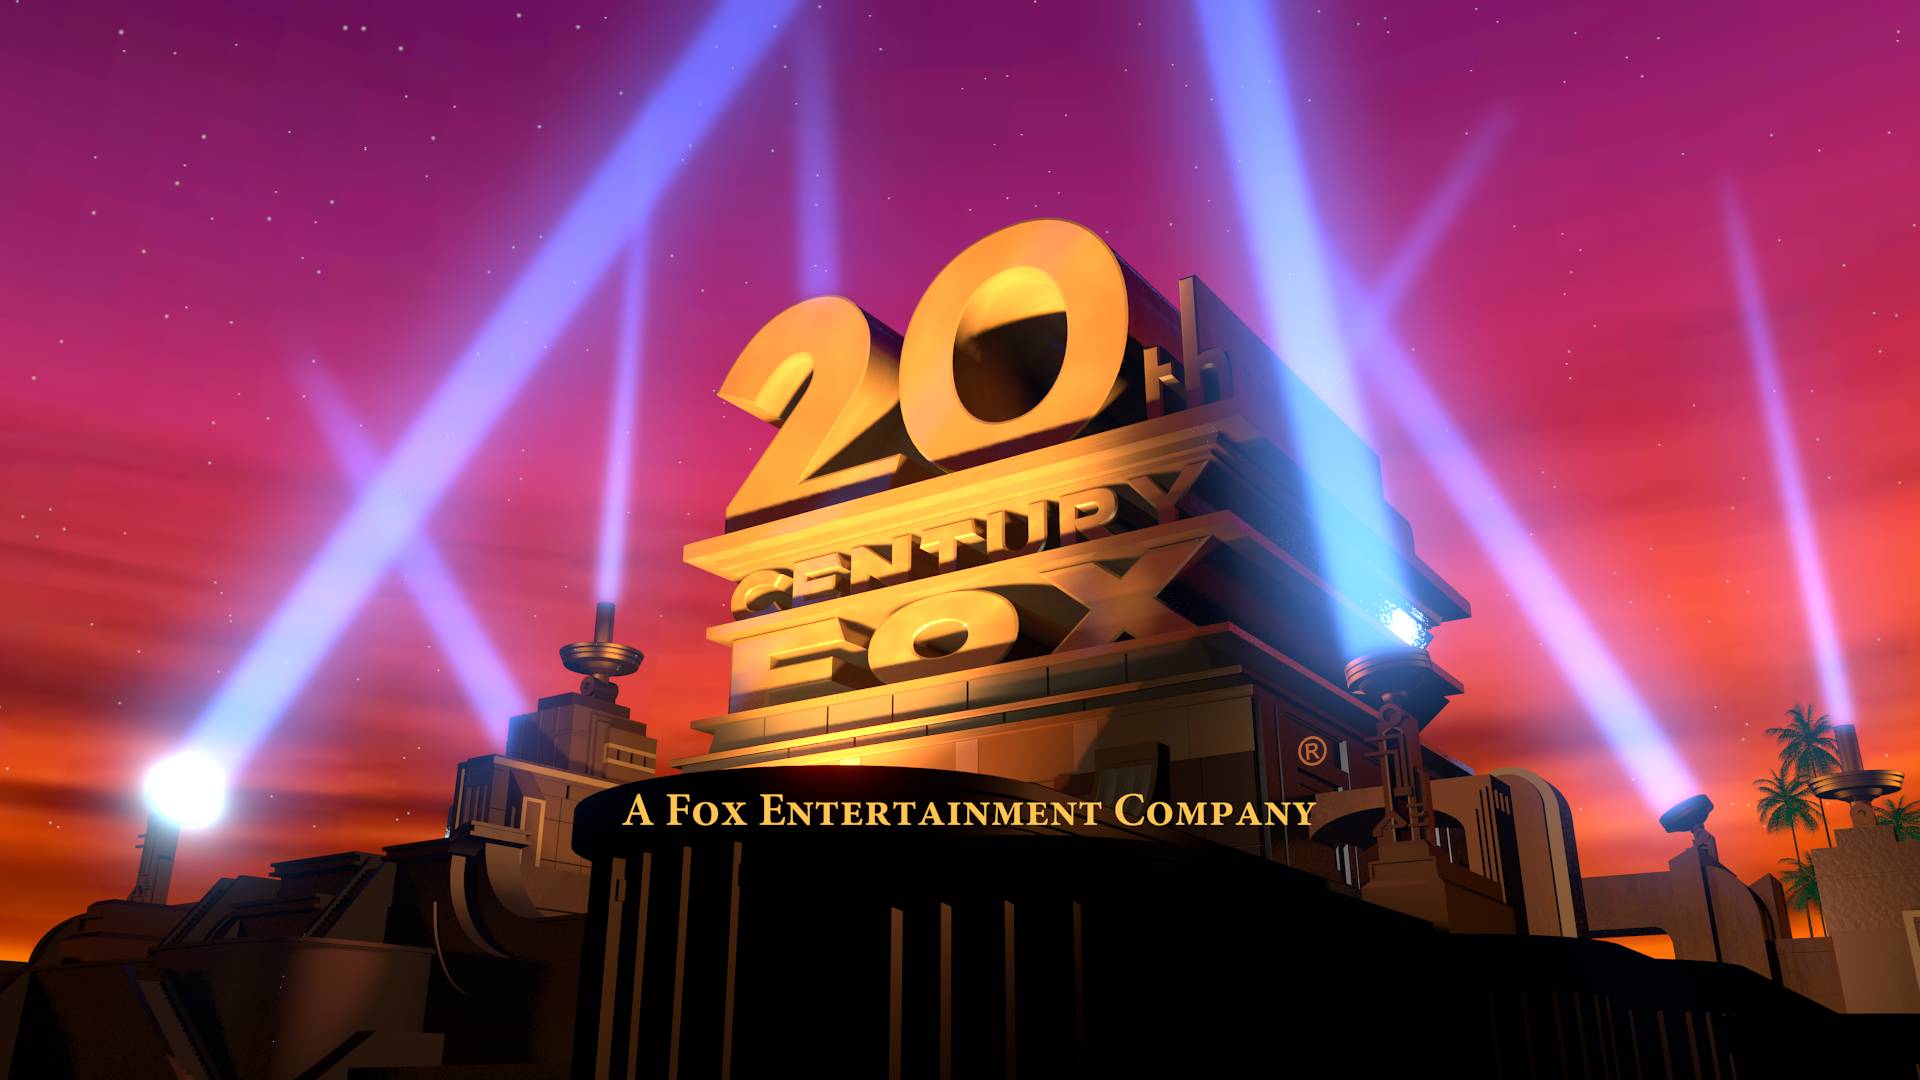 20th Century Fox logo (1994) Drawing by jacobcaceres on DeviantArt